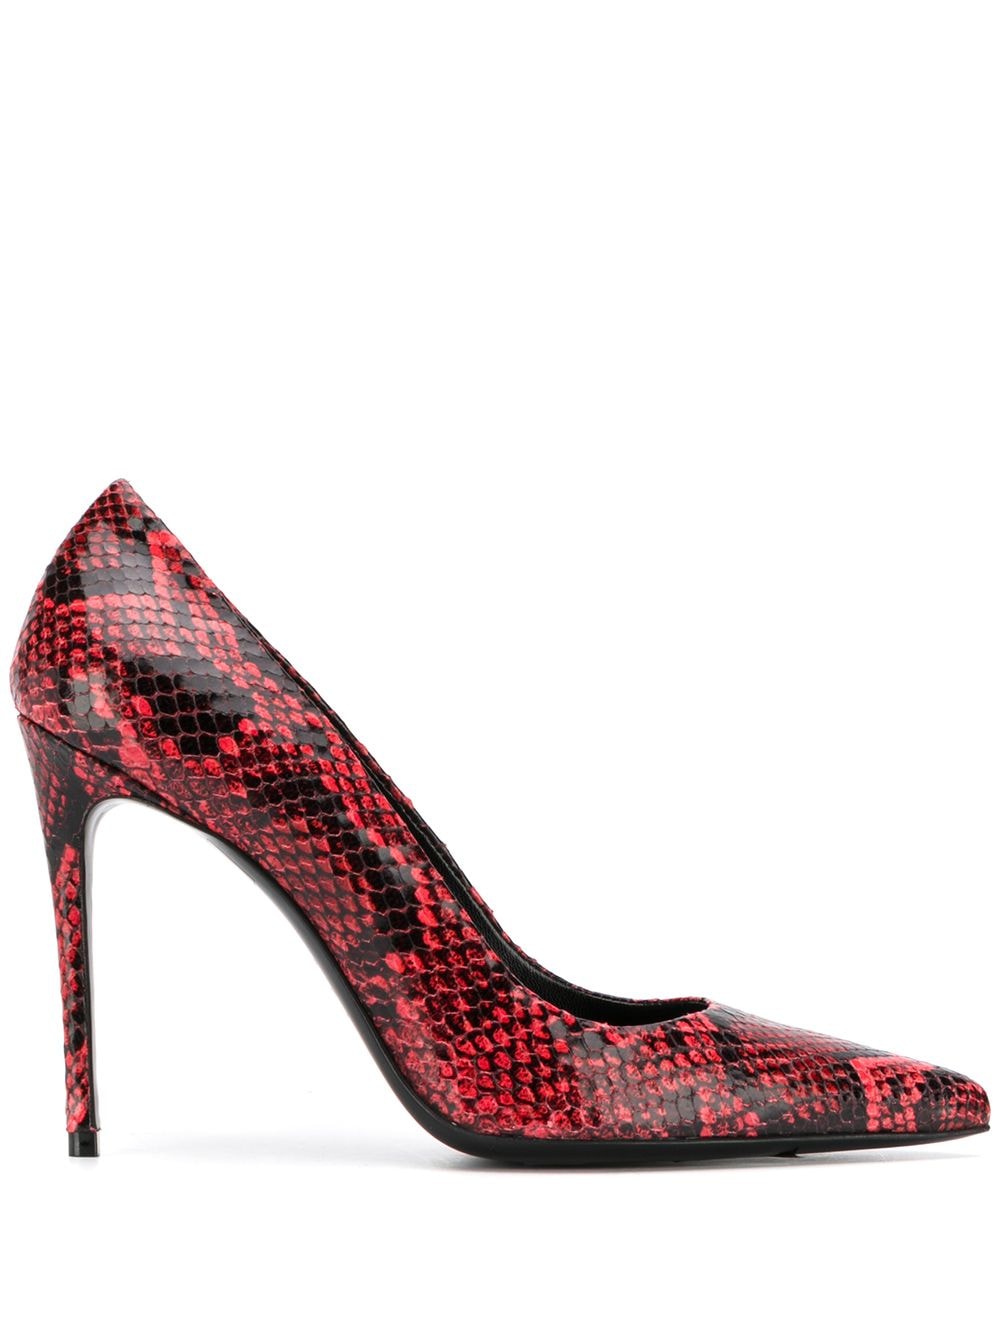 Giuliano Galiano Elise Pointed Pumps In Red